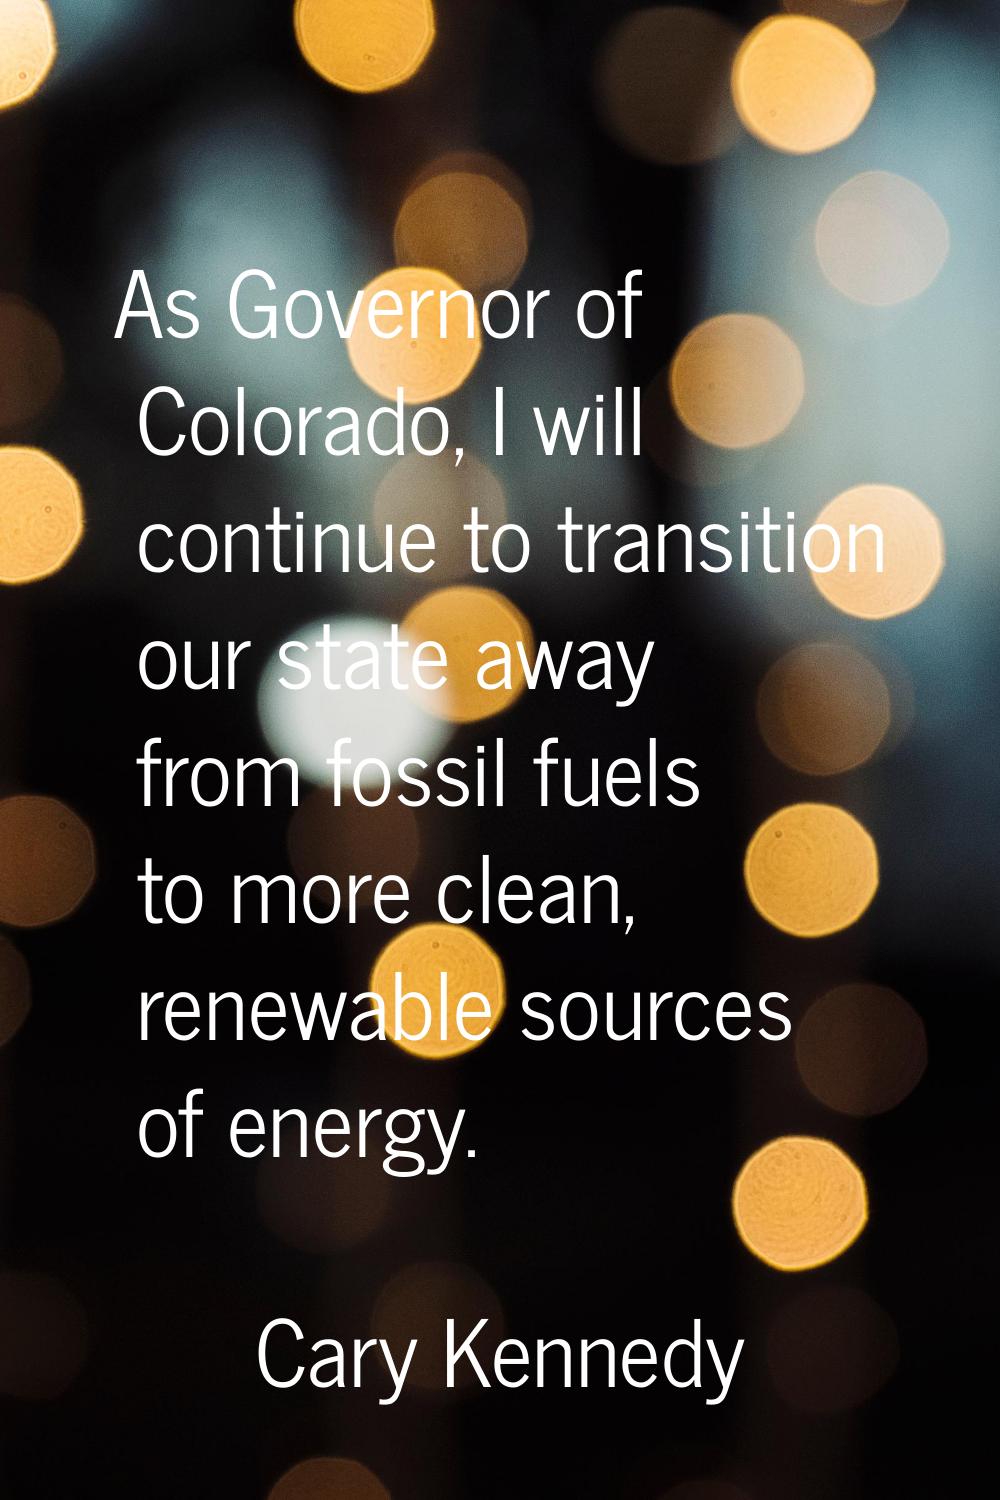 As Governor of Colorado, I will continue to transition our state away from fossil fuels to more cle